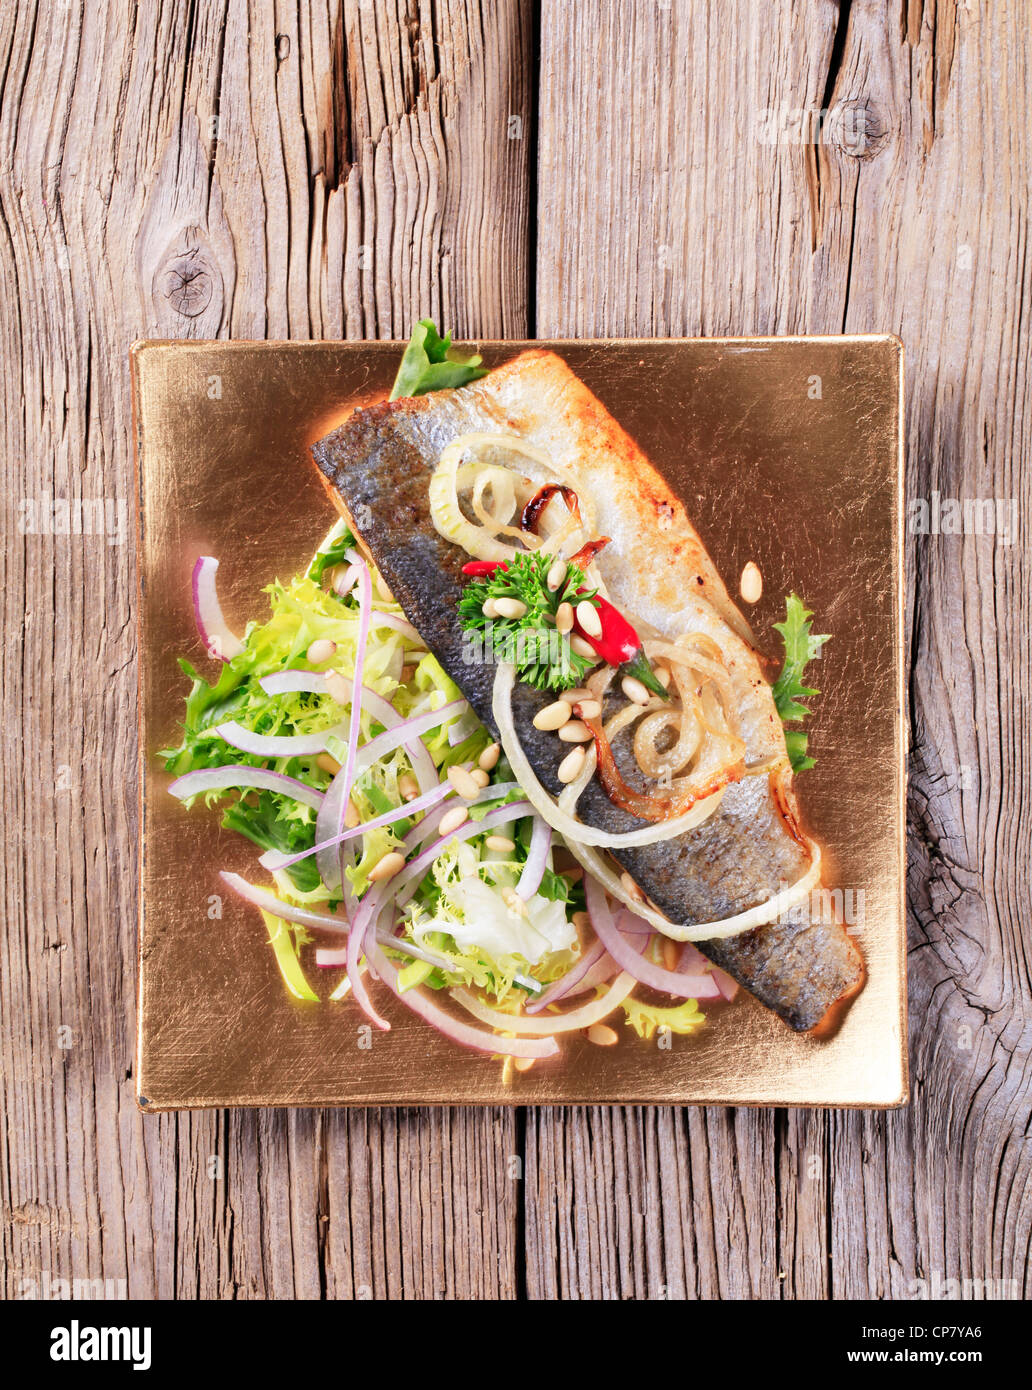 Pan fried trout fillet and green salad Stock Photo